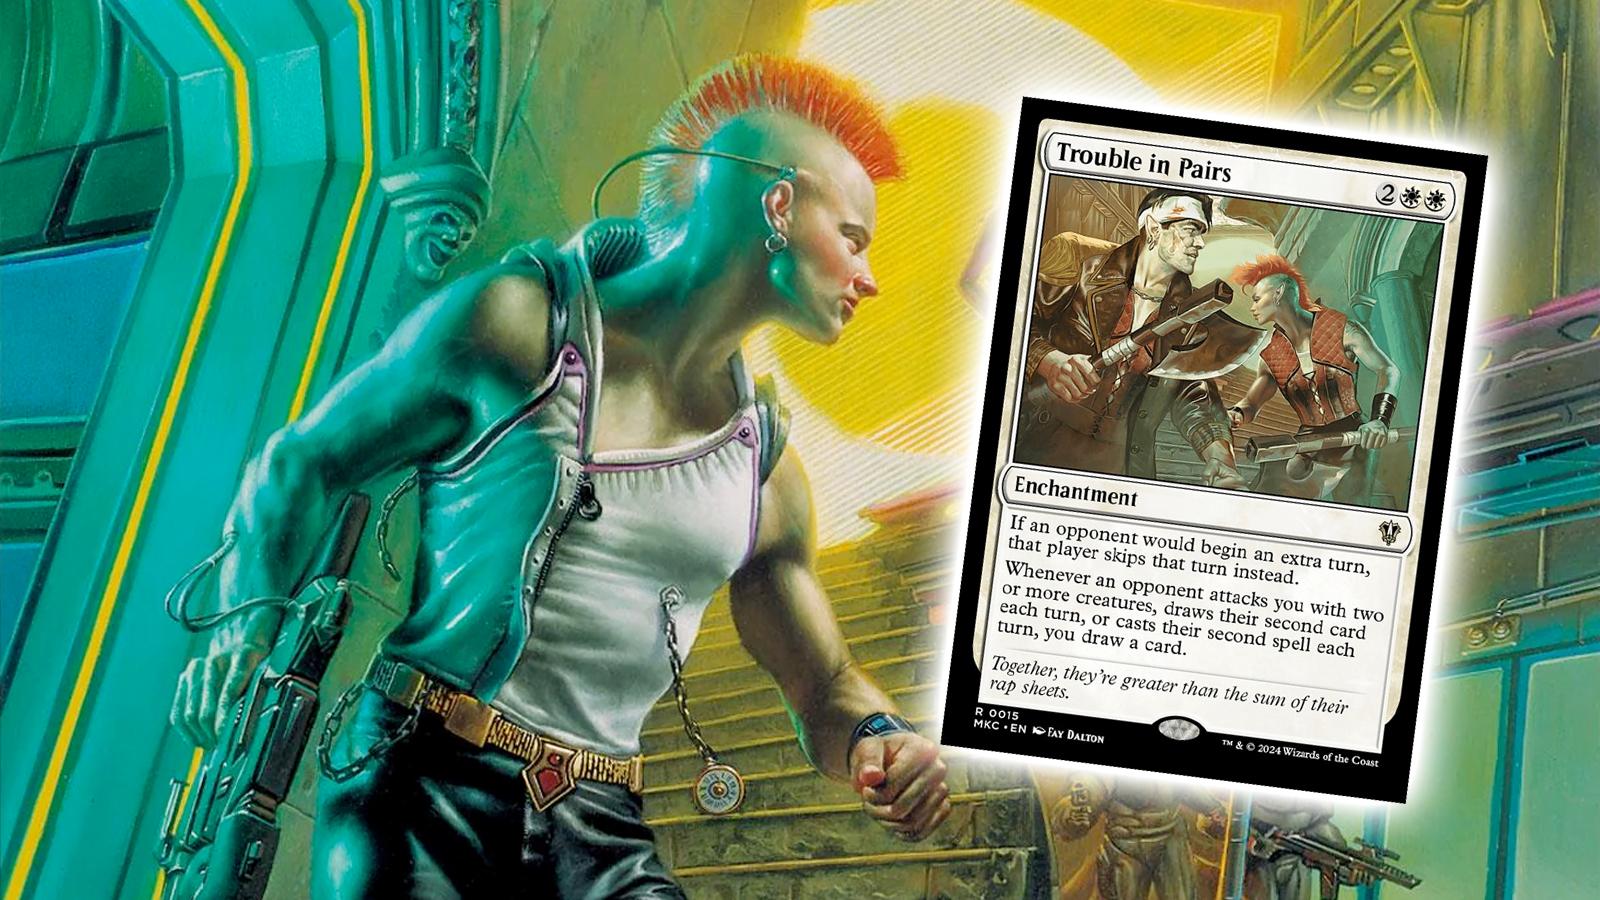 mtg card trouble in pairs overlayed on top of the original cyberpunk art that the artist is claiming was stolen from